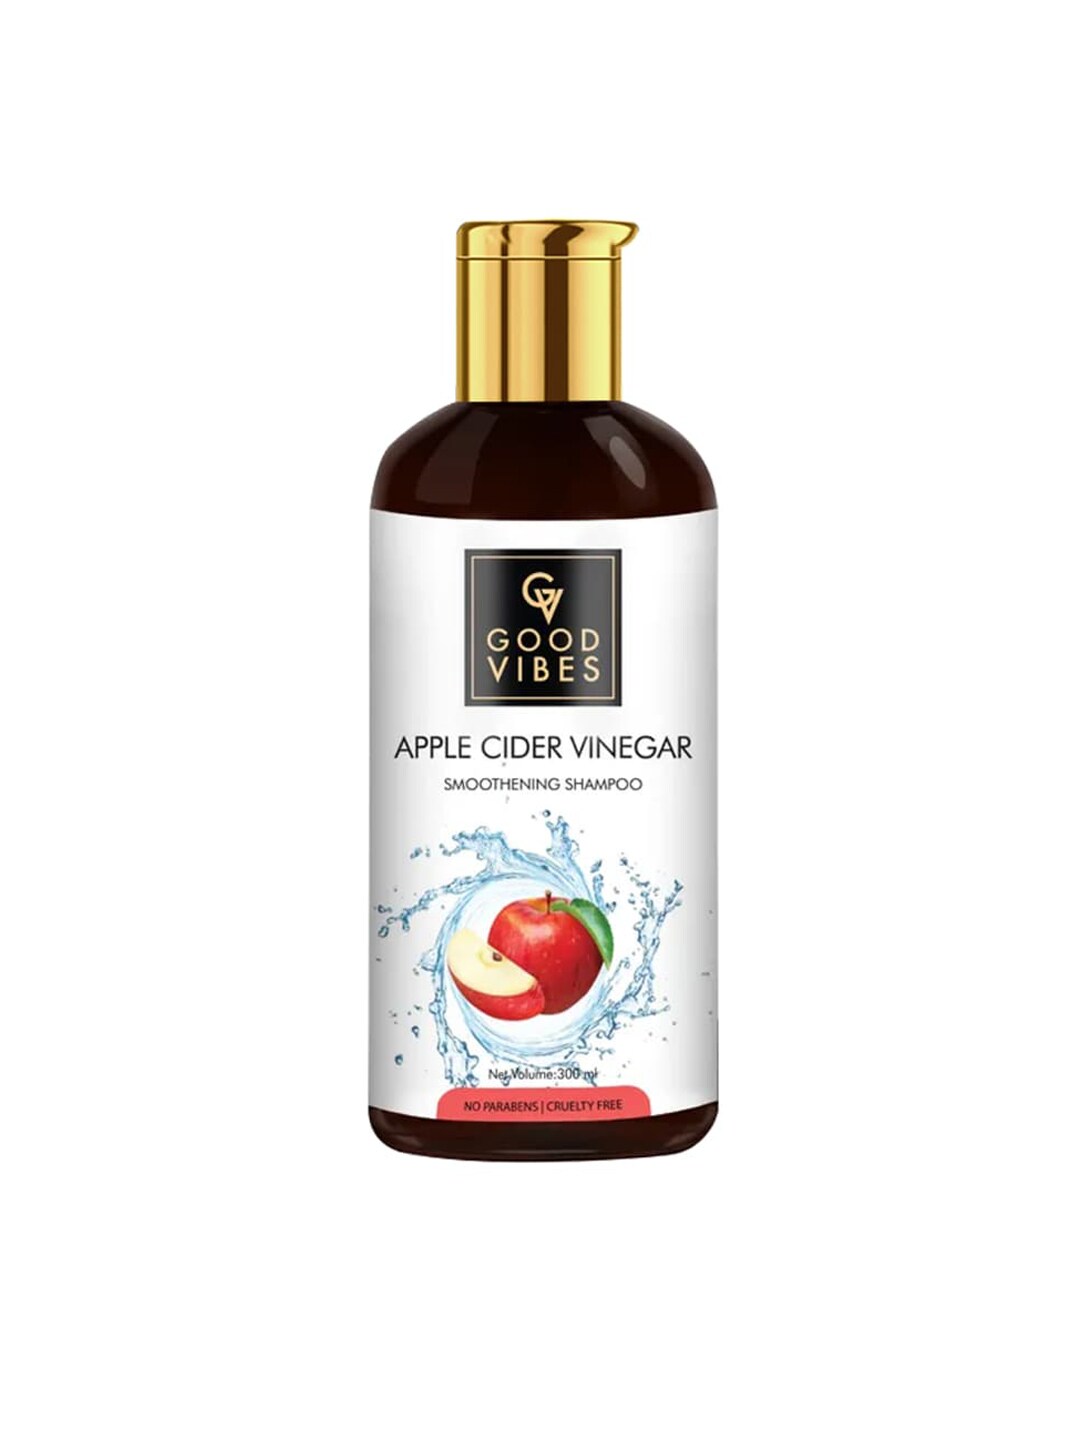 Good Vibes Apple Cider Vinegar Smoothing Shampoo 300 ml Price in India